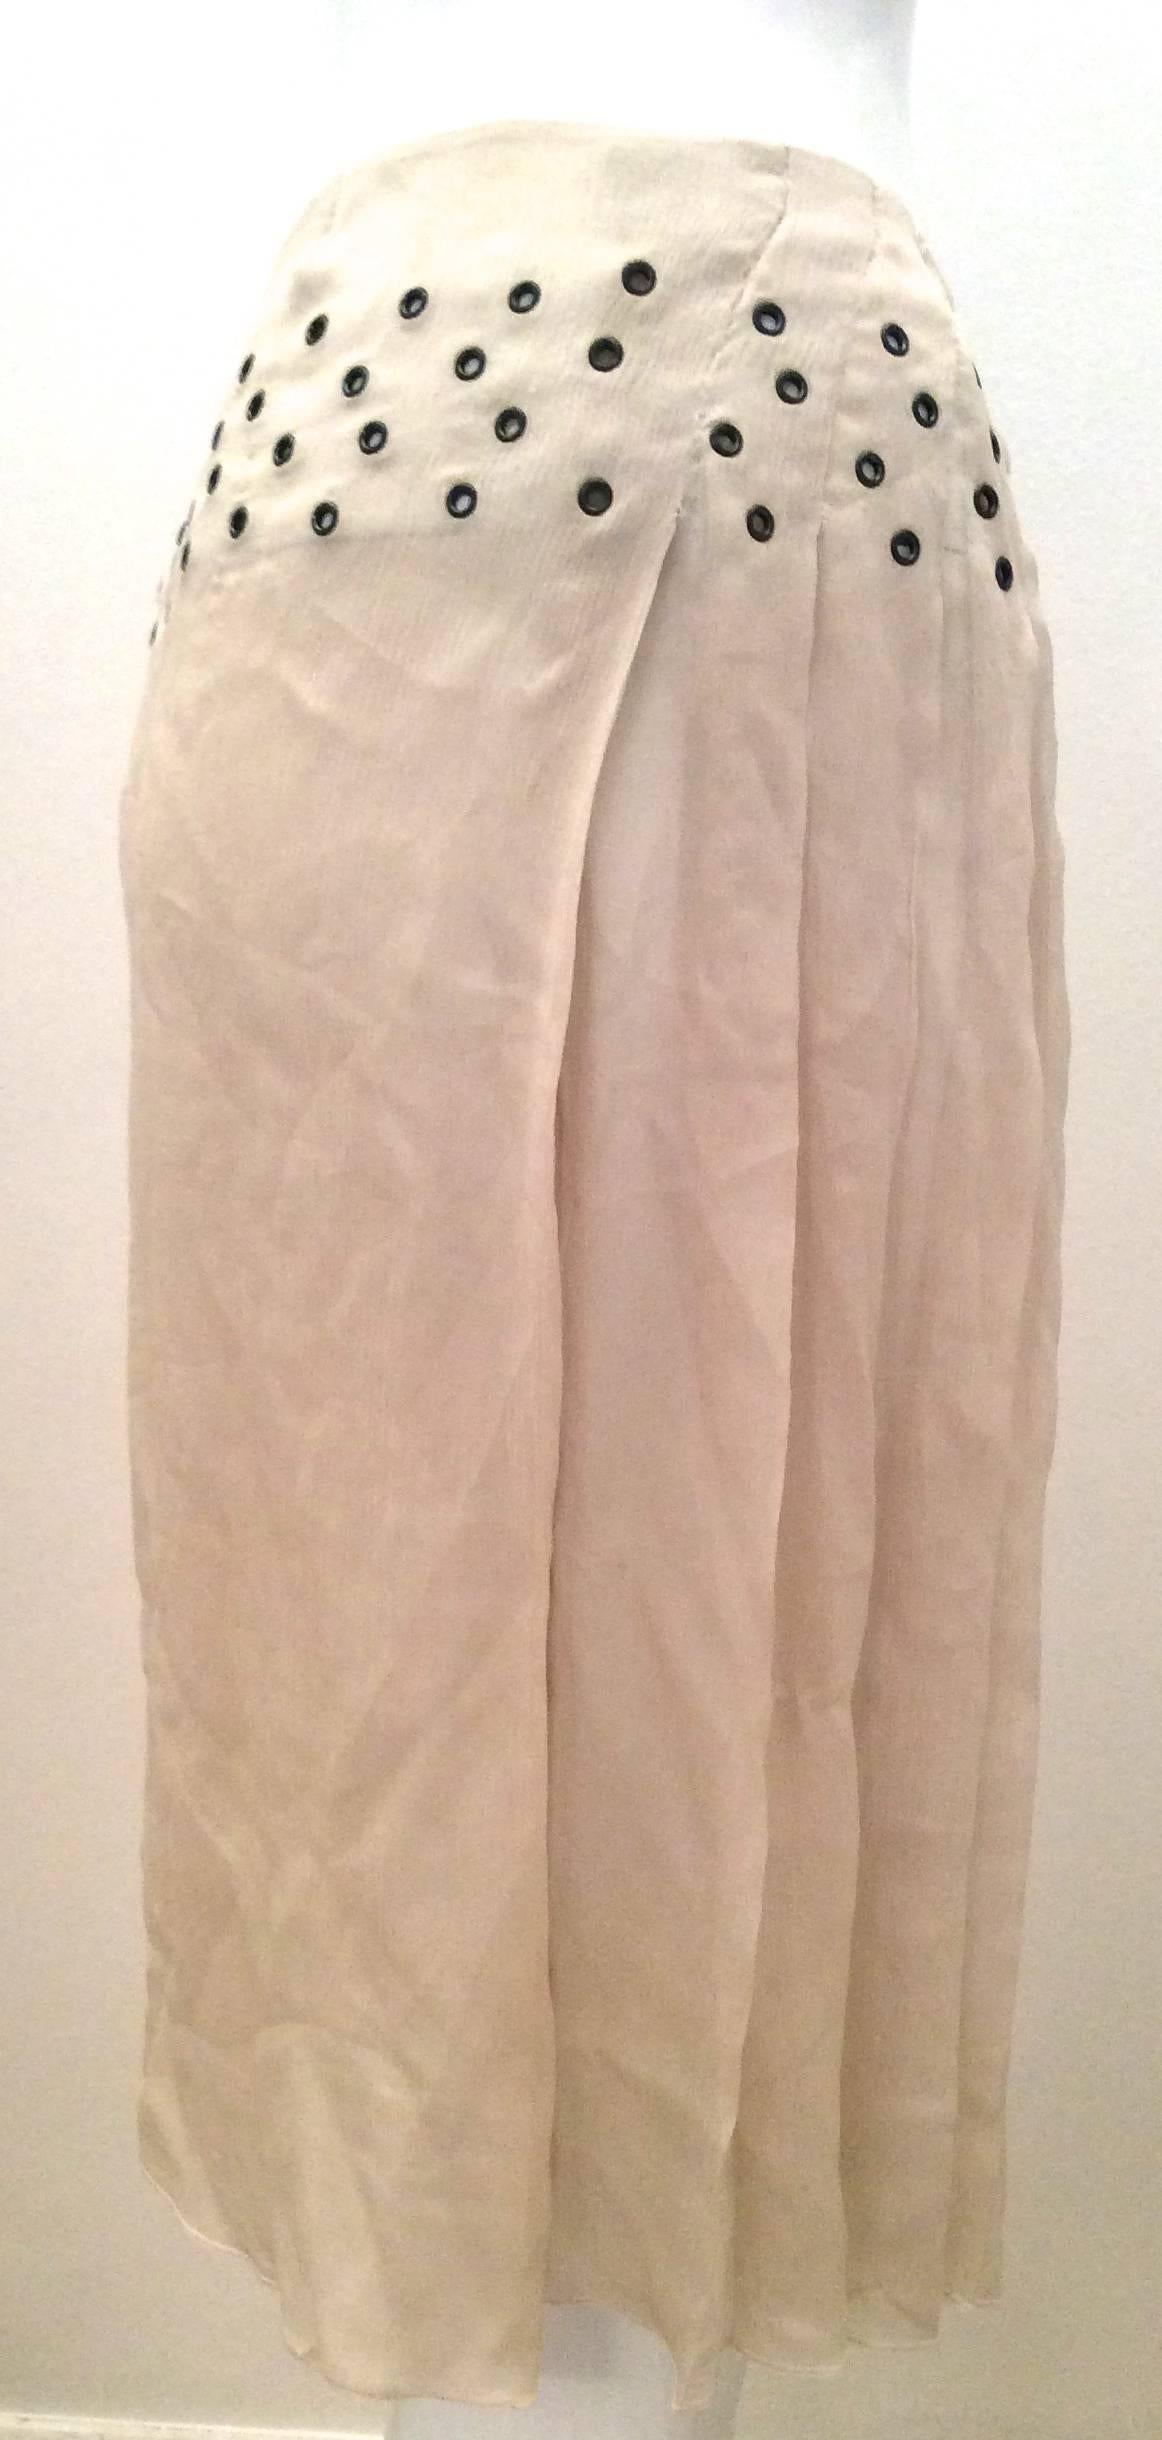 Presented here is a silk Prada skirt that is a creamy beige color. The skirt is made of 100% silk sheer fabric. There are grommets around the top of the skirt from about 1.5 inches from the top of the waist to 4 inches below the waist of the skirt.